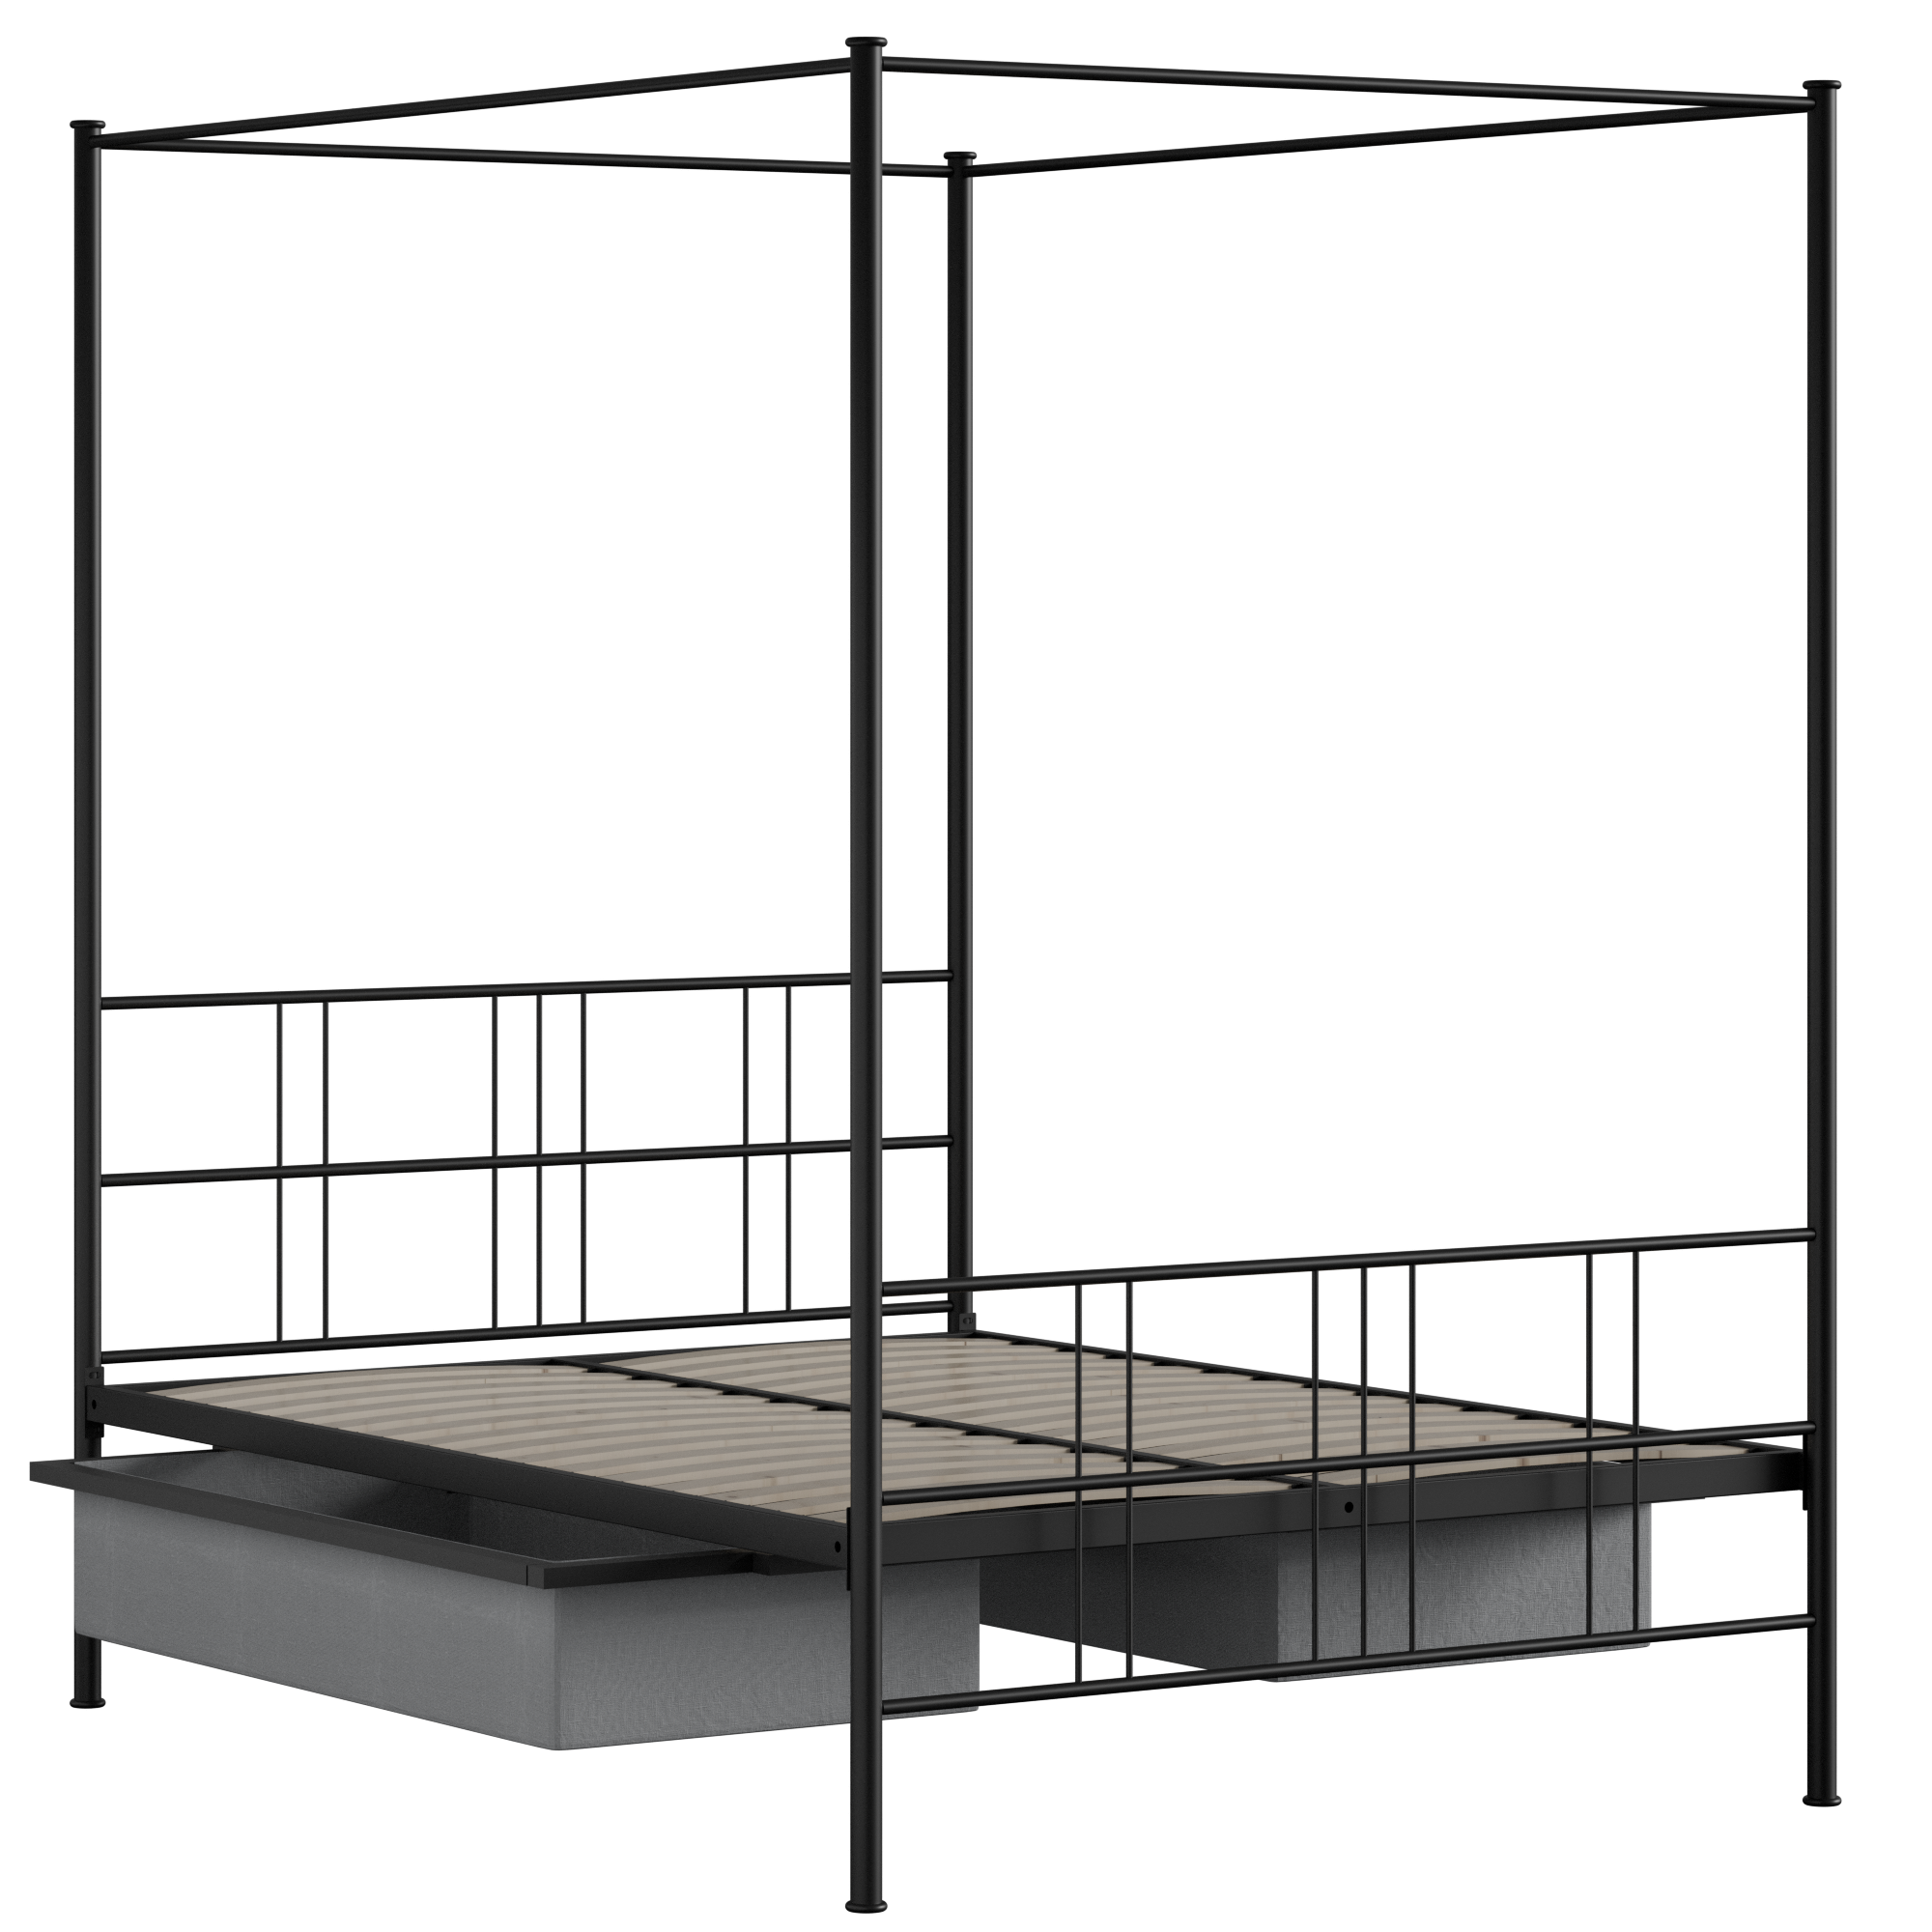 Toulon iron/metal bed in black with drawers